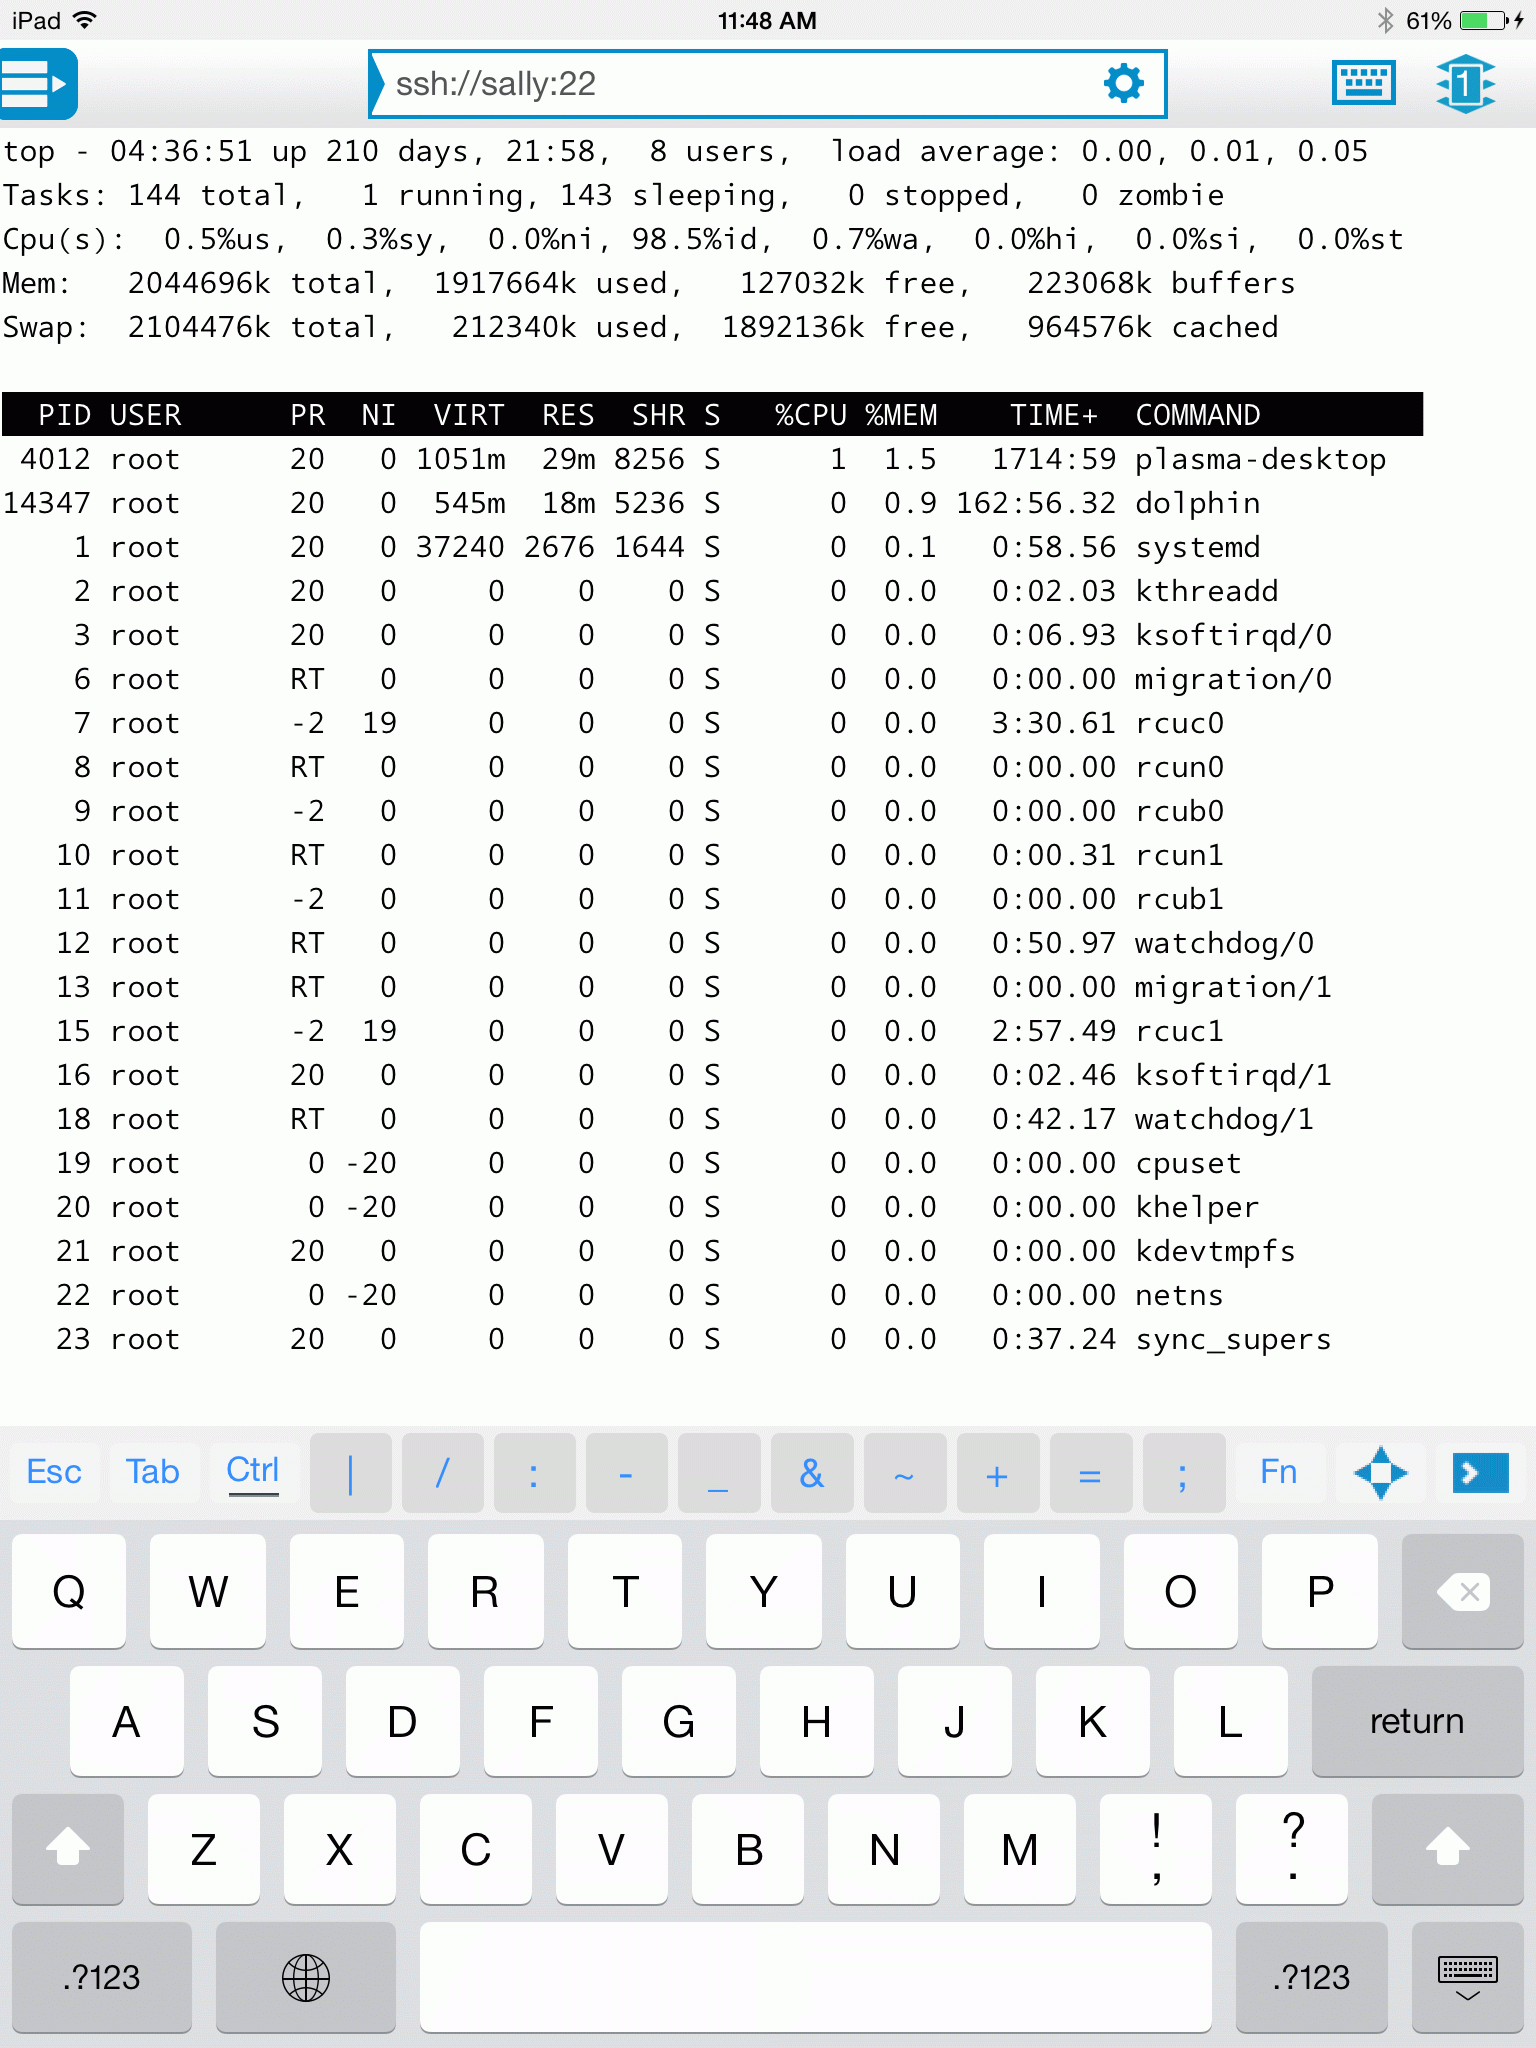 Figure 1. Reflection for UNIX on iPad: connected SSH session with Keybar